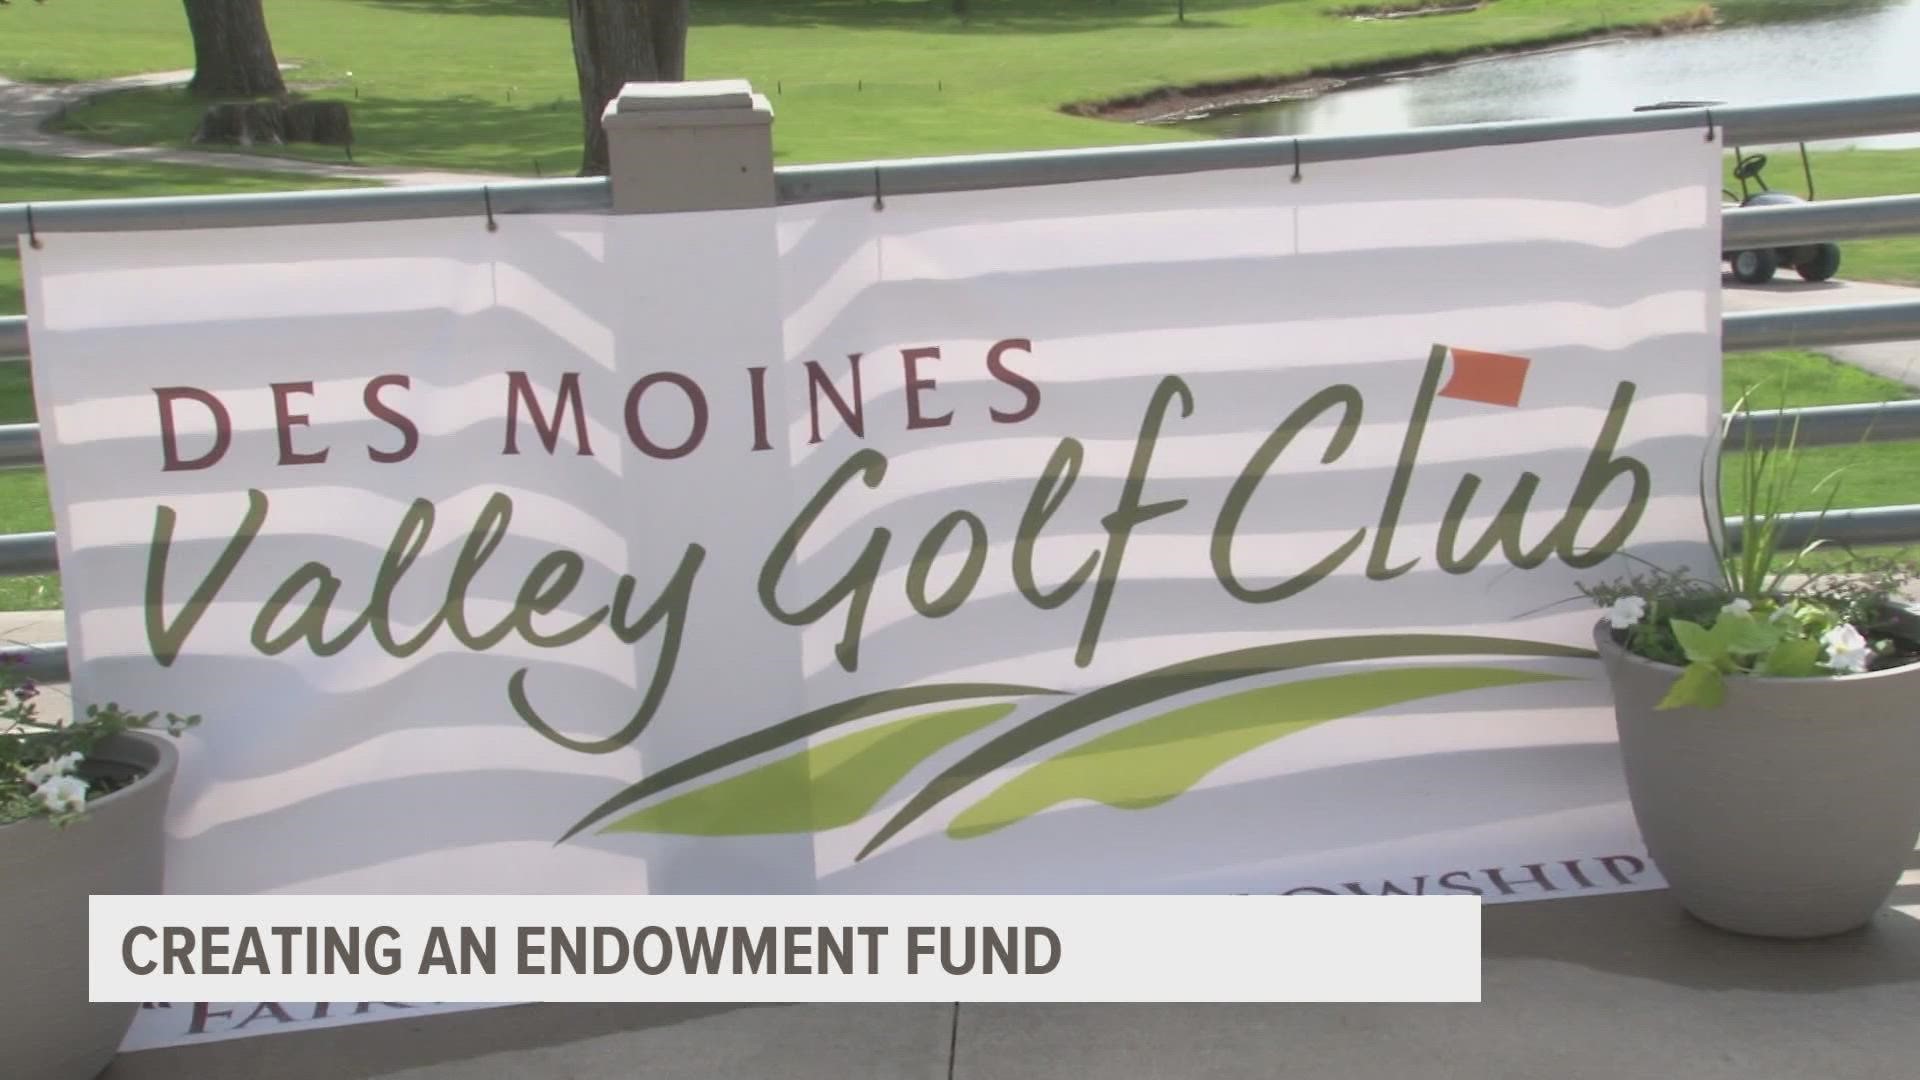 The Des Moines Valley Golf Club created an endowment fund to help more minority students pay for college.